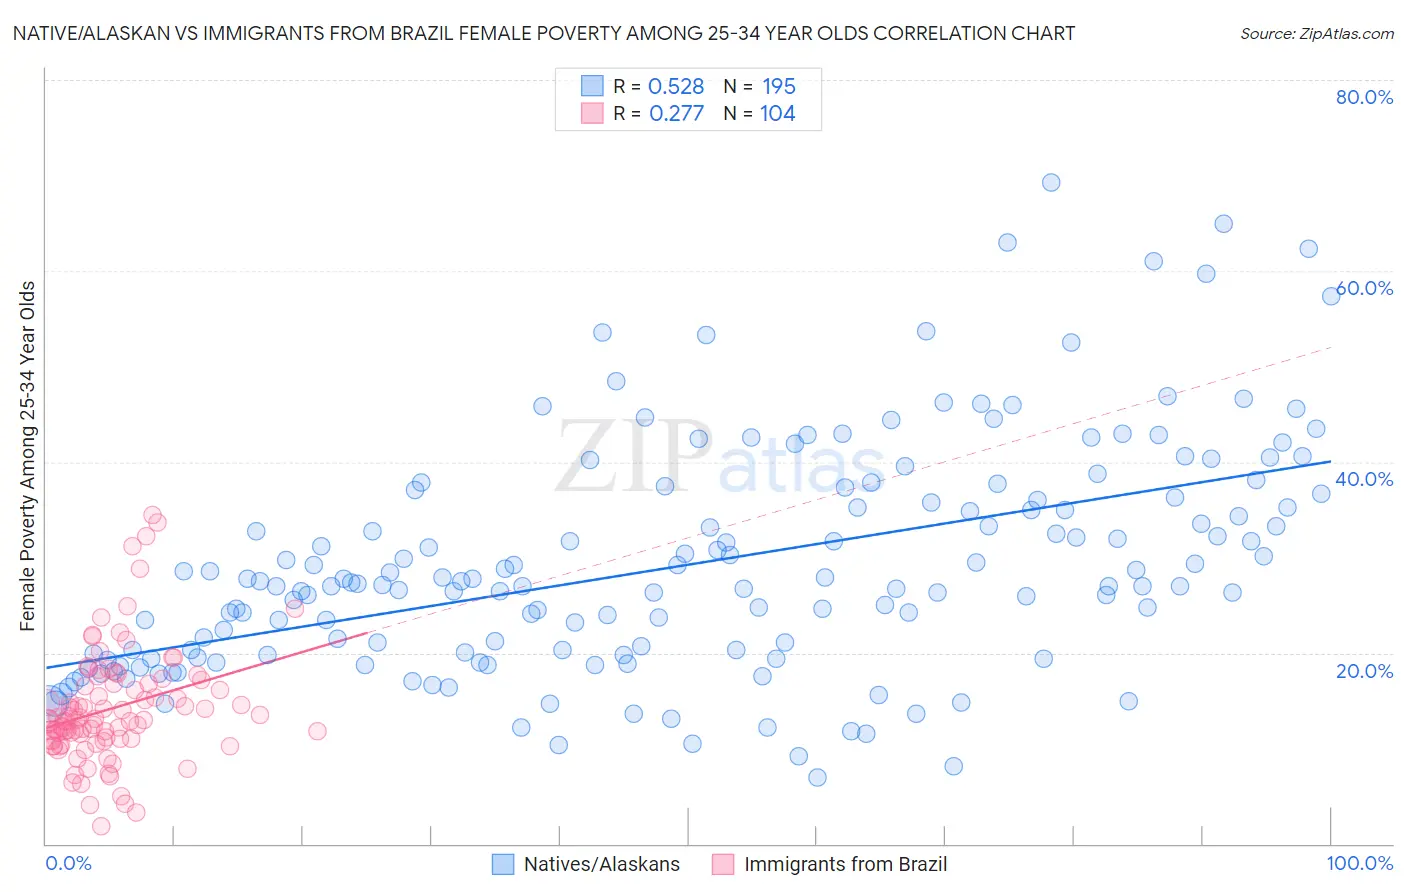 Native/Alaskan vs Immigrants from Brazil Female Poverty Among 25-34 Year Olds